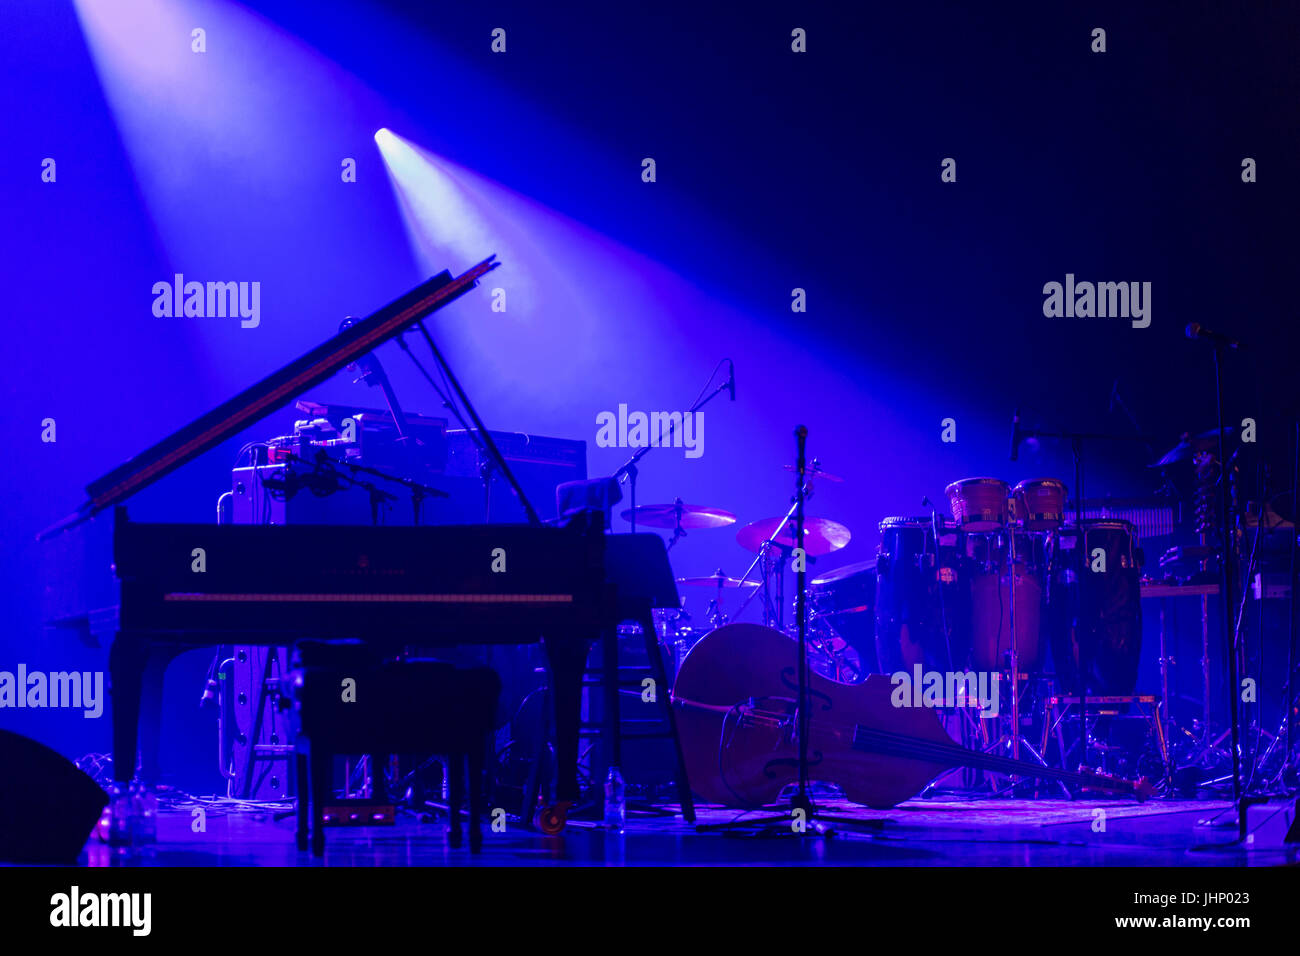 musical instruments on a stage with dramatic stage lighting Stock Photo